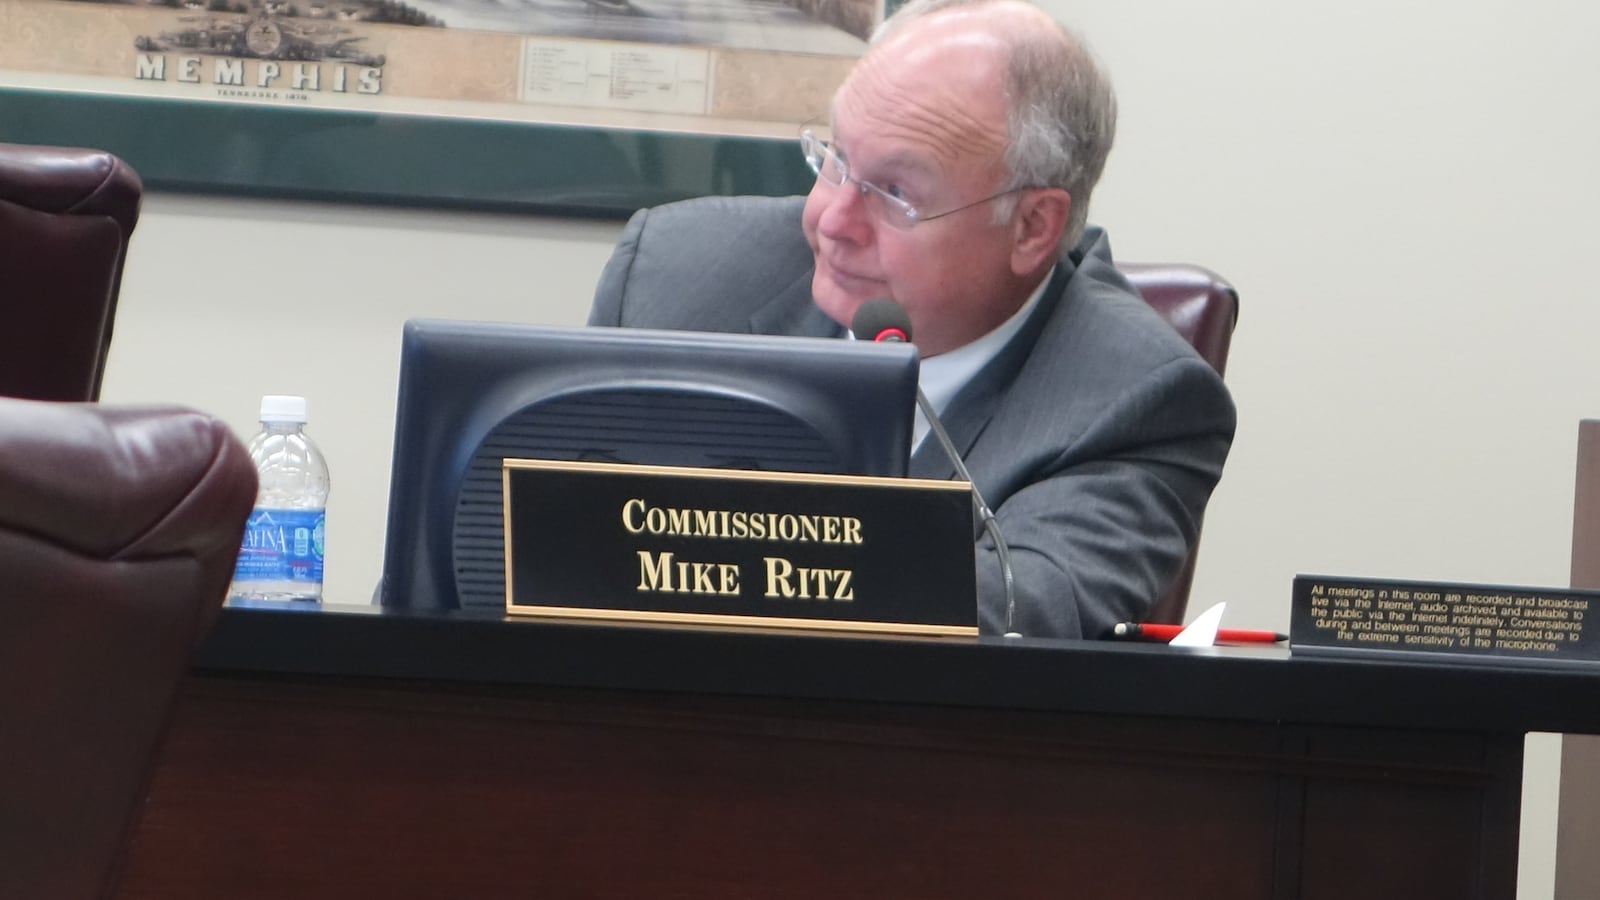 Commissioner Mike Ritz proposed an amendment that would've lowered the building study cost from $1.8 to $1.2 million and given Shelby County Schools control.